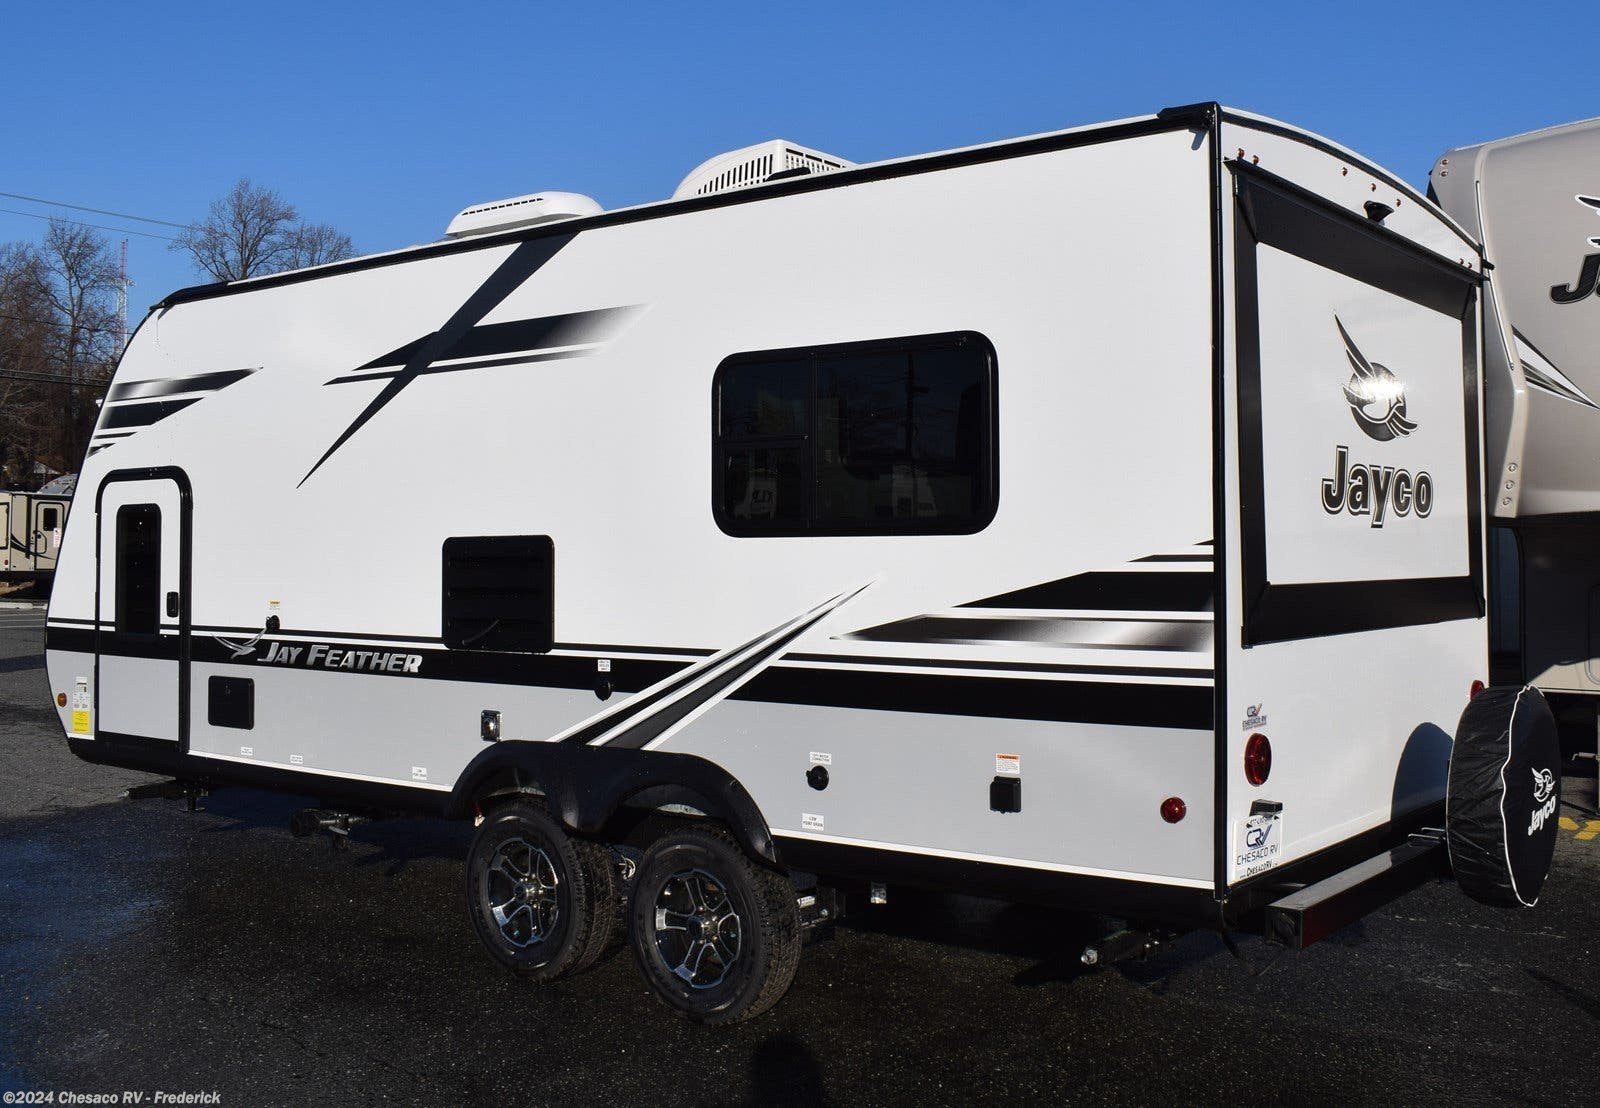 2020 Jayco Jay Feather X213 RV for Sale in Frederick, MD ...